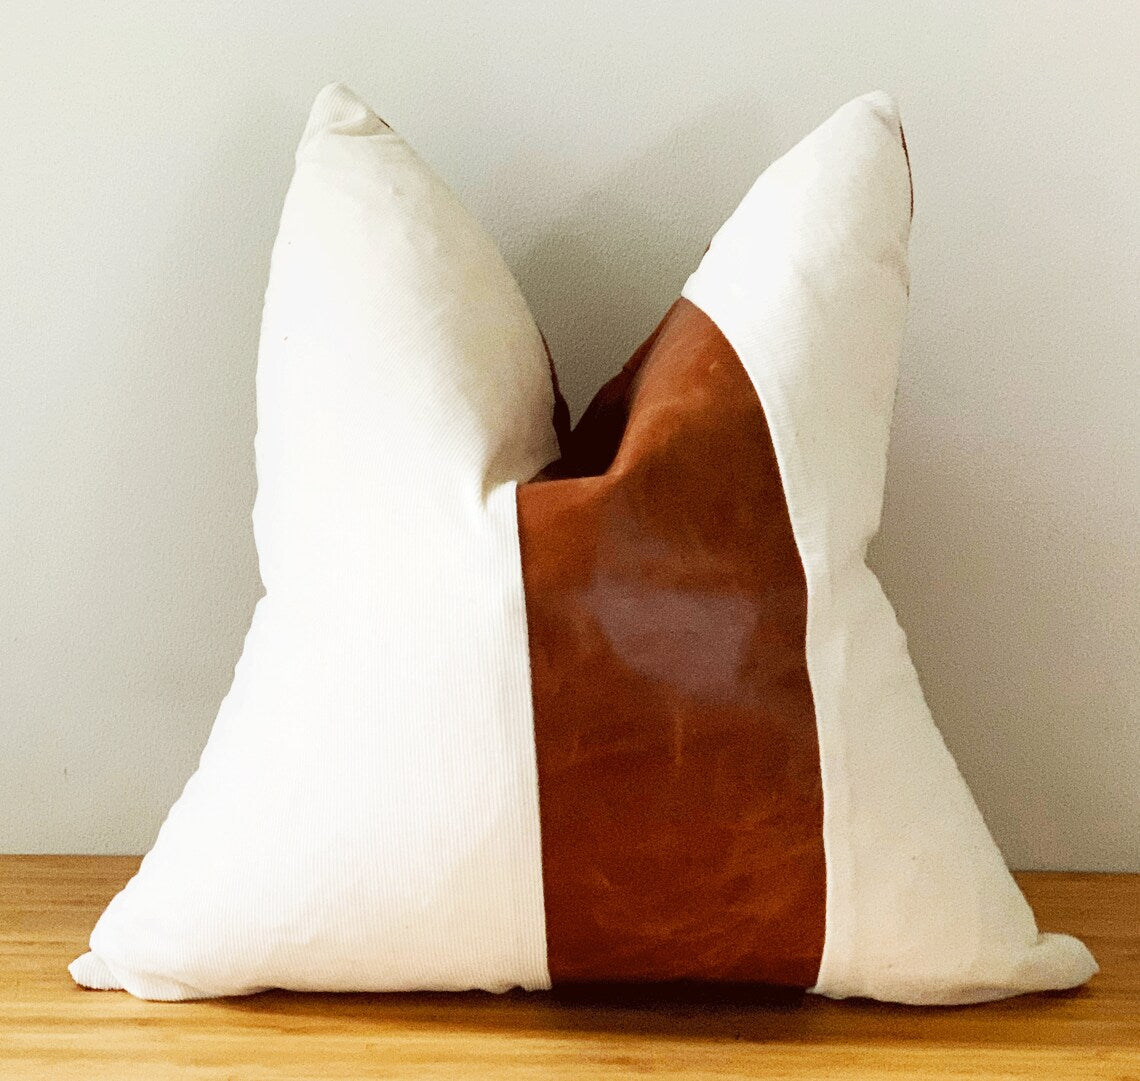 Melbourne Leather Co Genuine Leather Cushion Cover Pillow Cover Leather Pillow Leather Cushion Vintage Leather Tan Pillow Cover - LCC02